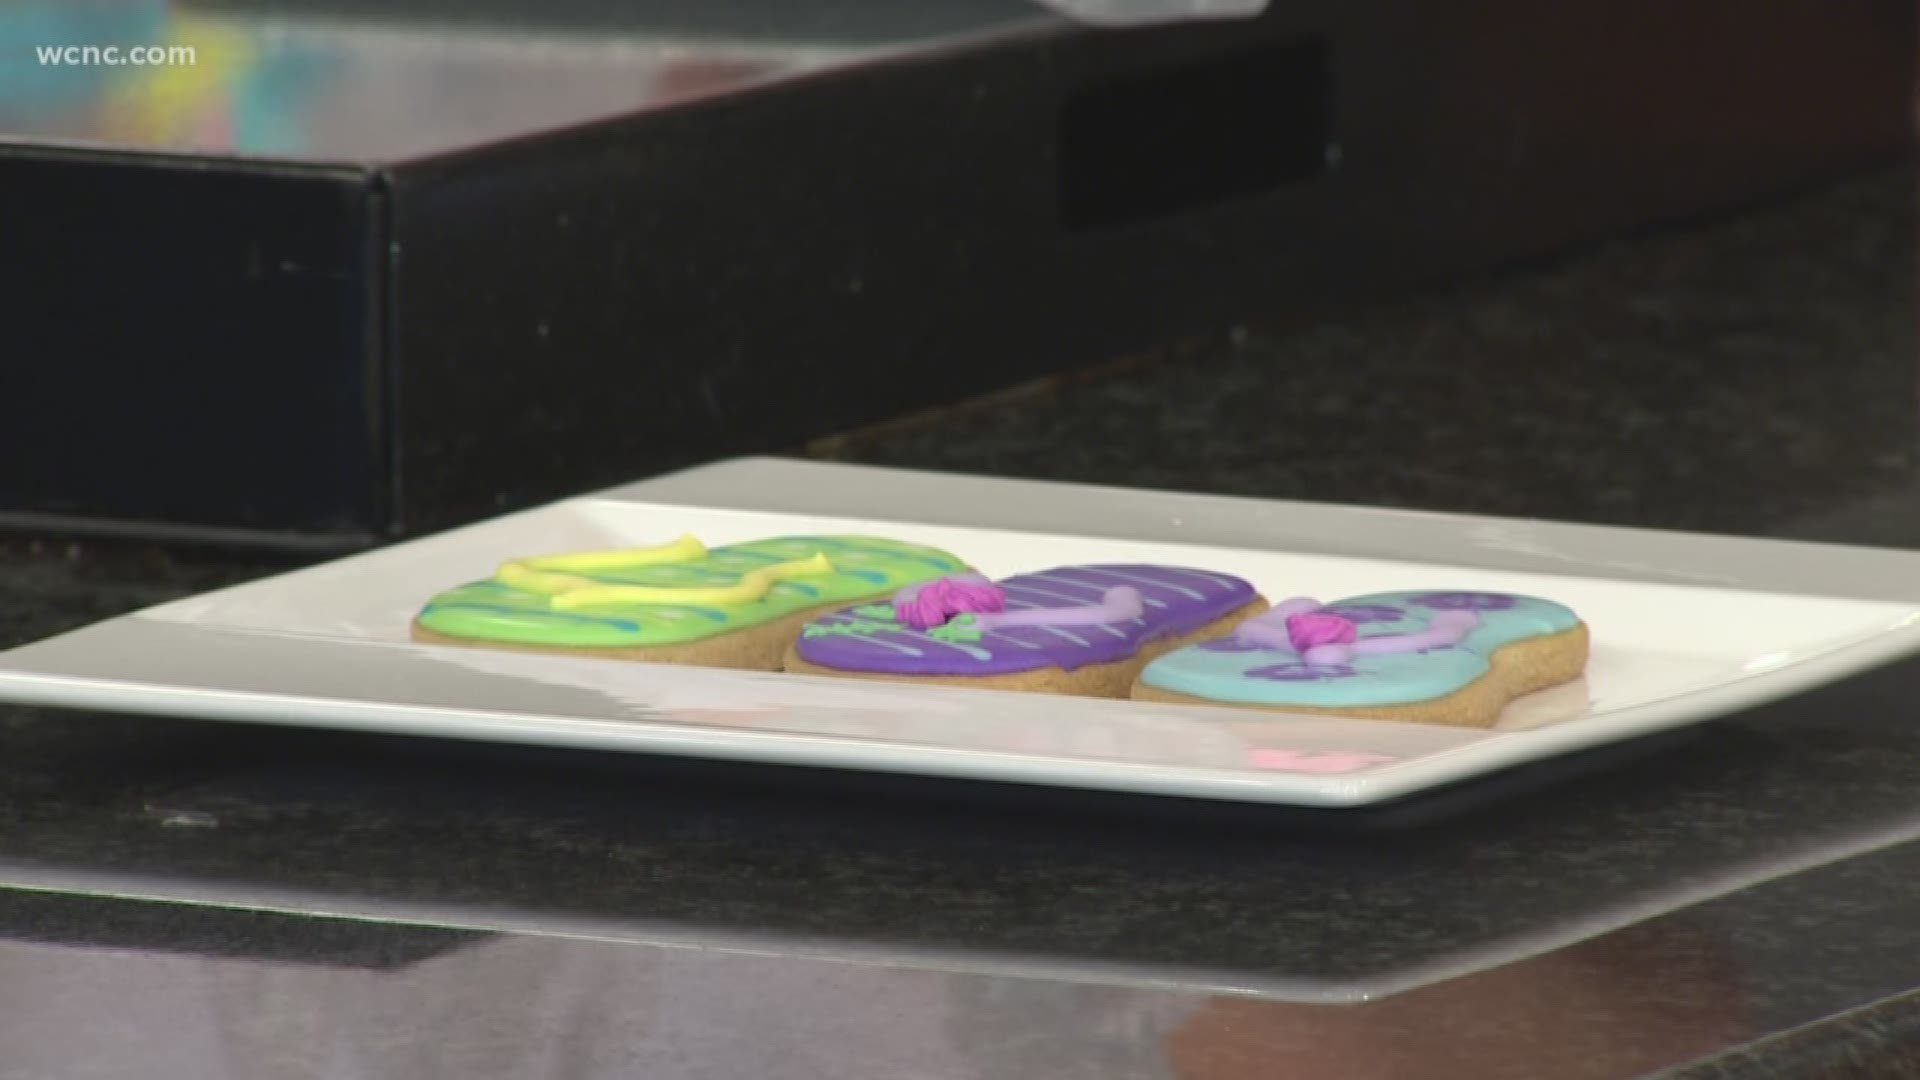 Vibrant, decorated cookies that are almost too pretty to eat! Gina Burke with Pink Turtle Cookies shares tips on how to decorate eye-catching cookies.